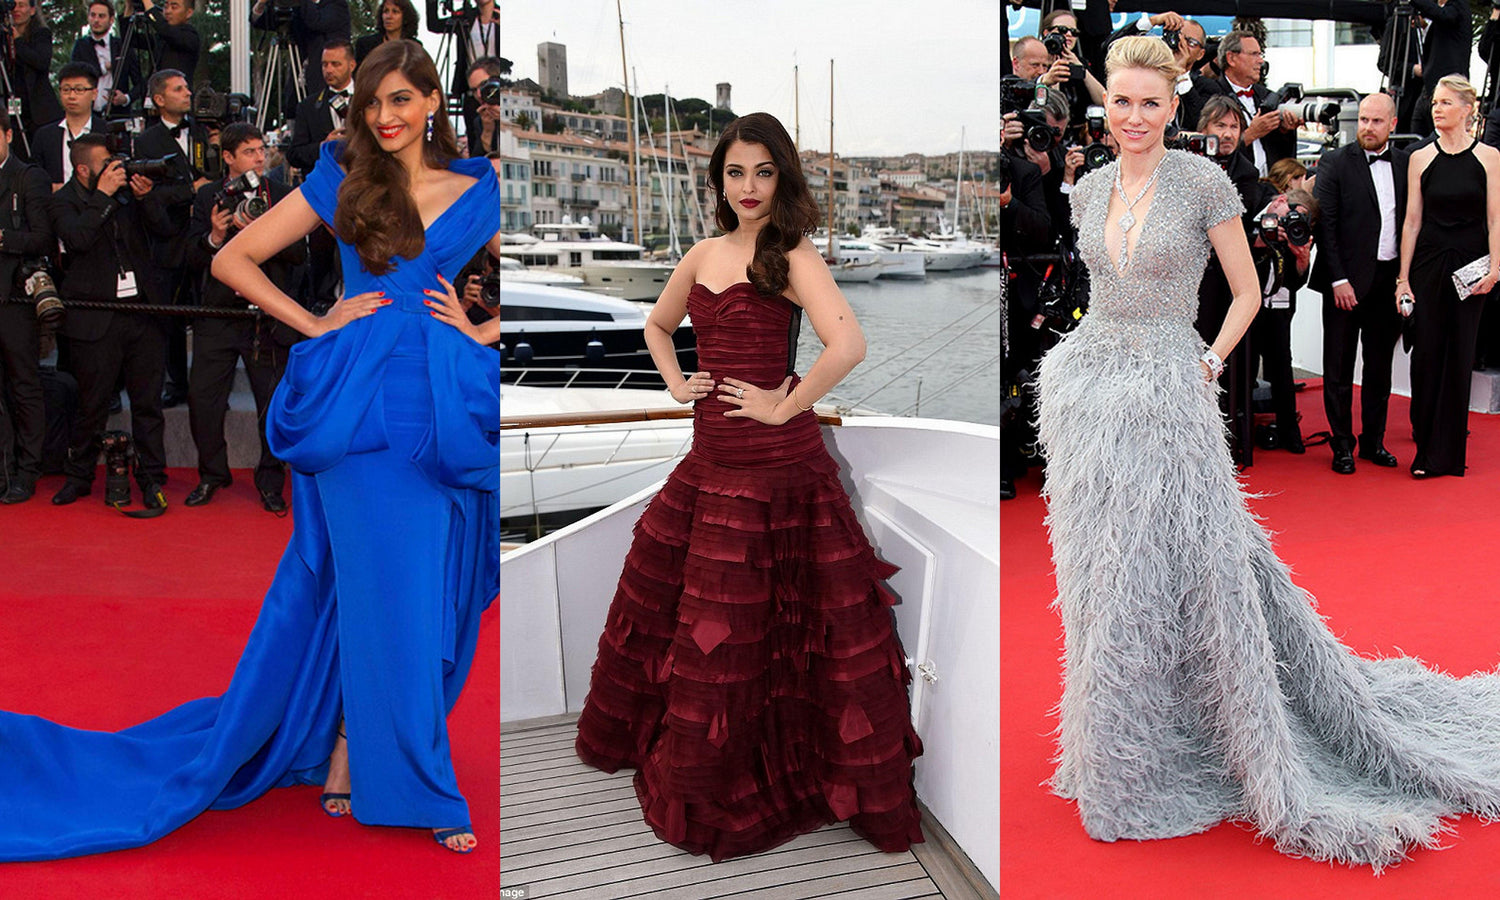 TOP TEN LOOKS FROM THE CANNES 2015